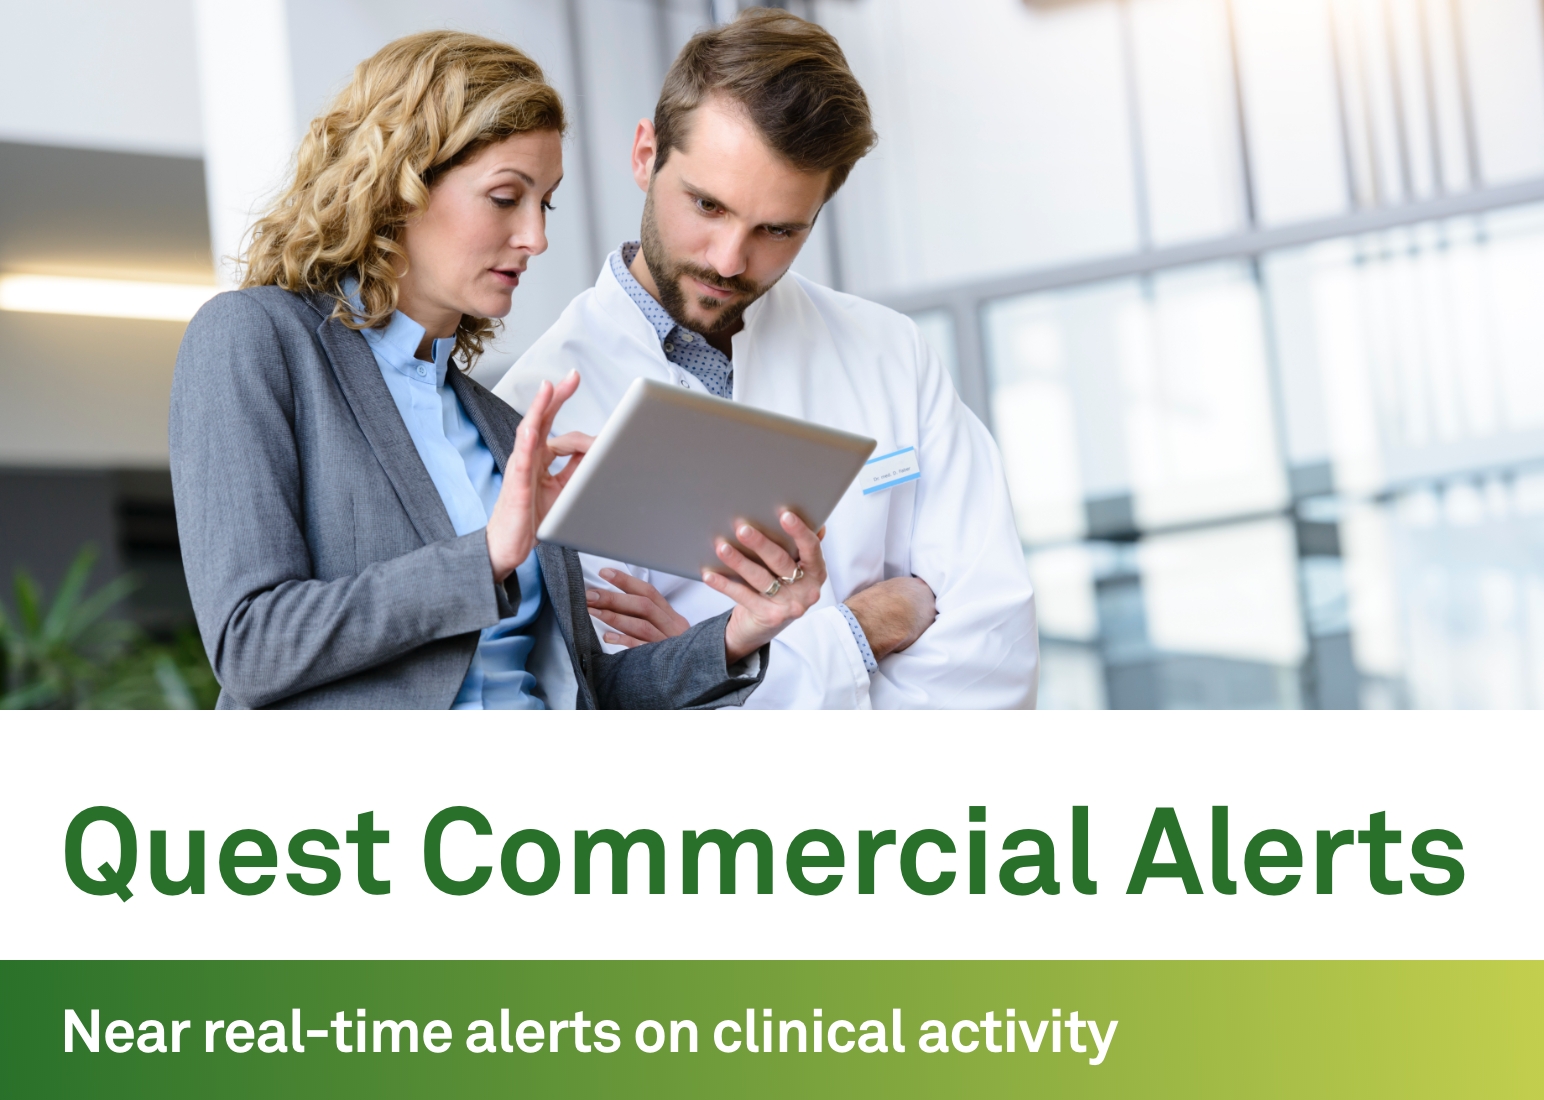 Quest Commercial Alerts: near real-time alerts on clinical activity